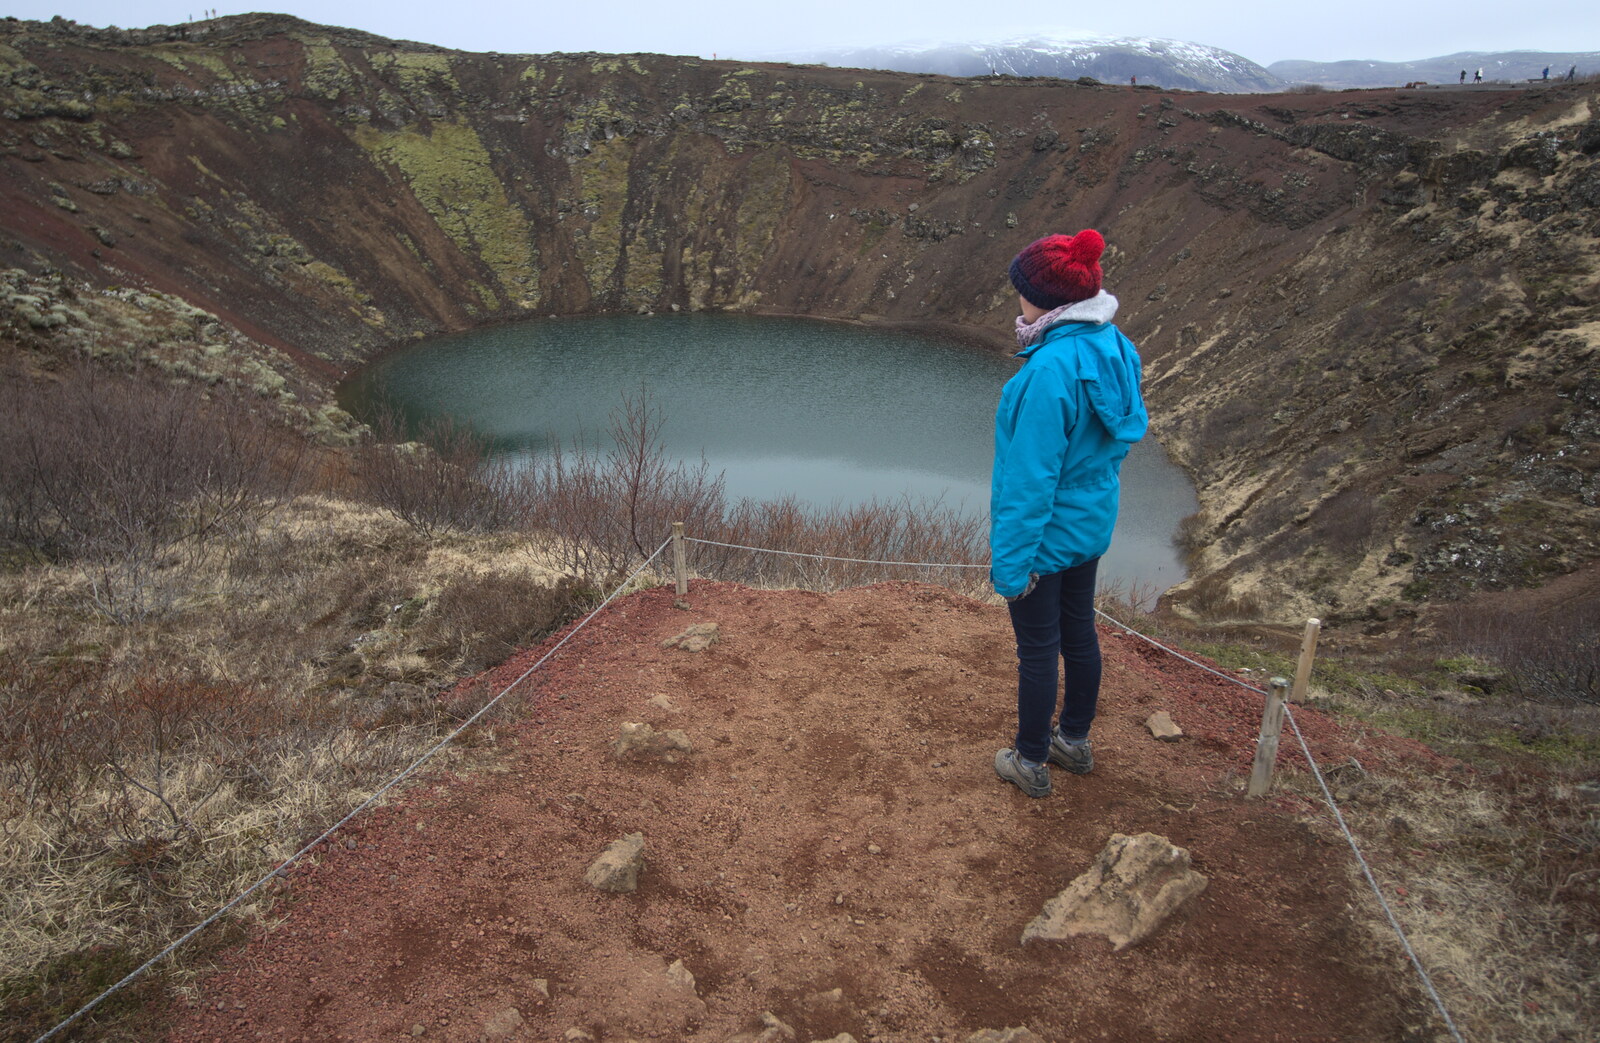 Isobel inspects the crater from The Golden Circle of Ísland, Iceland - 22nd April 2017